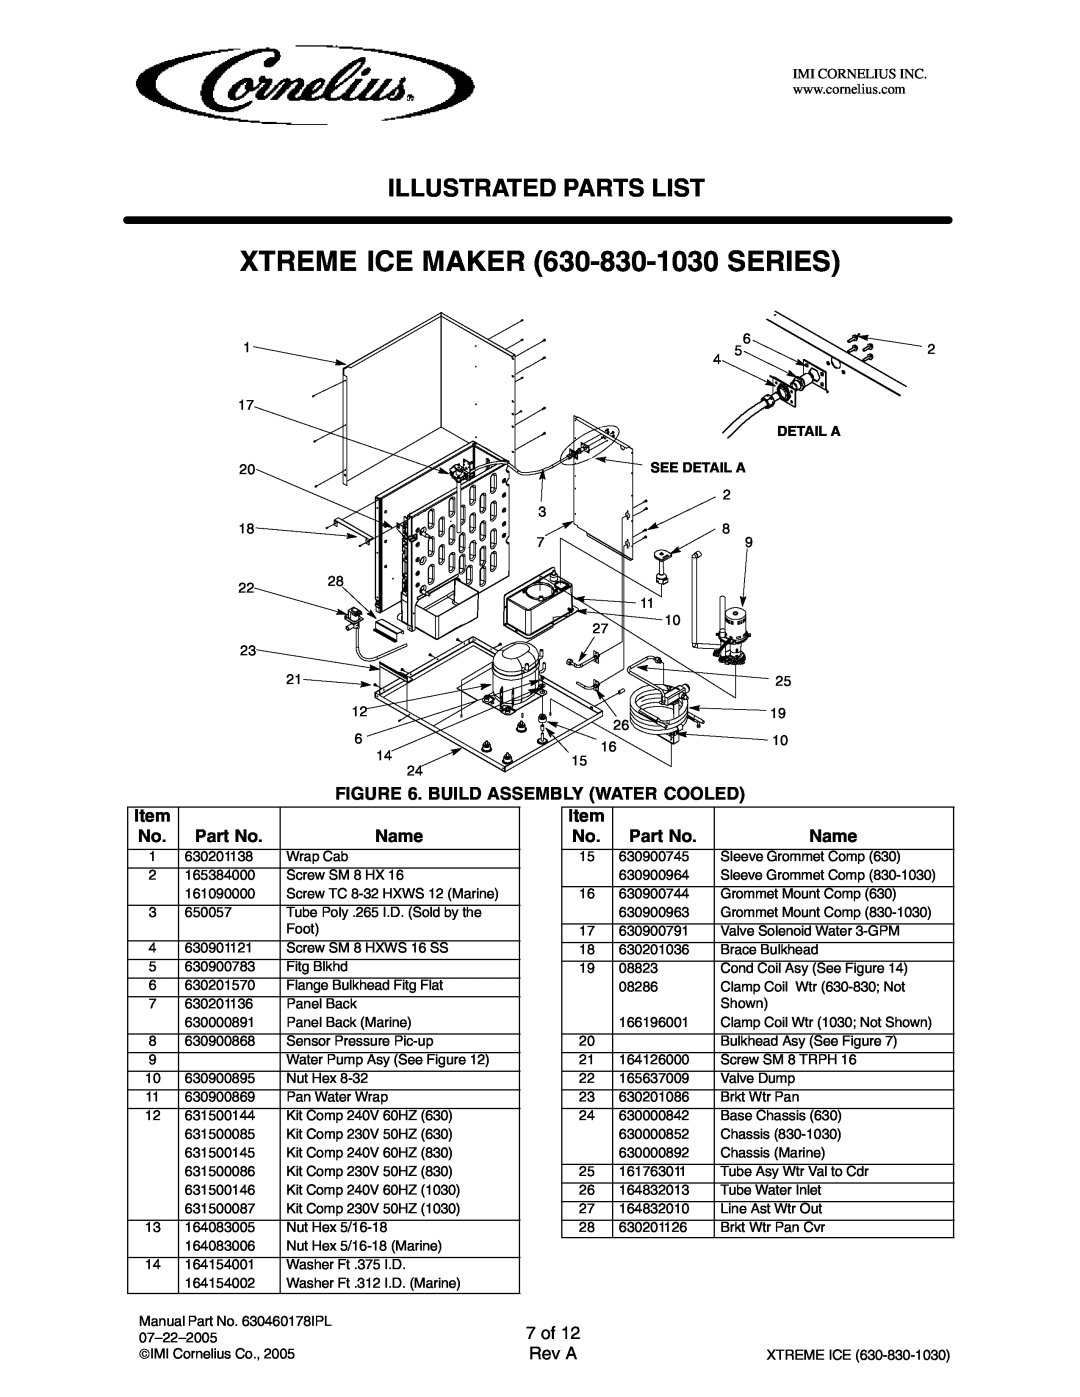 Cornelius 631808003 manual 7 of, XTREME ICE MAKER 630-830-1030SERIES, Illustrated Parts List, Rev A, Detail A See Detail A 